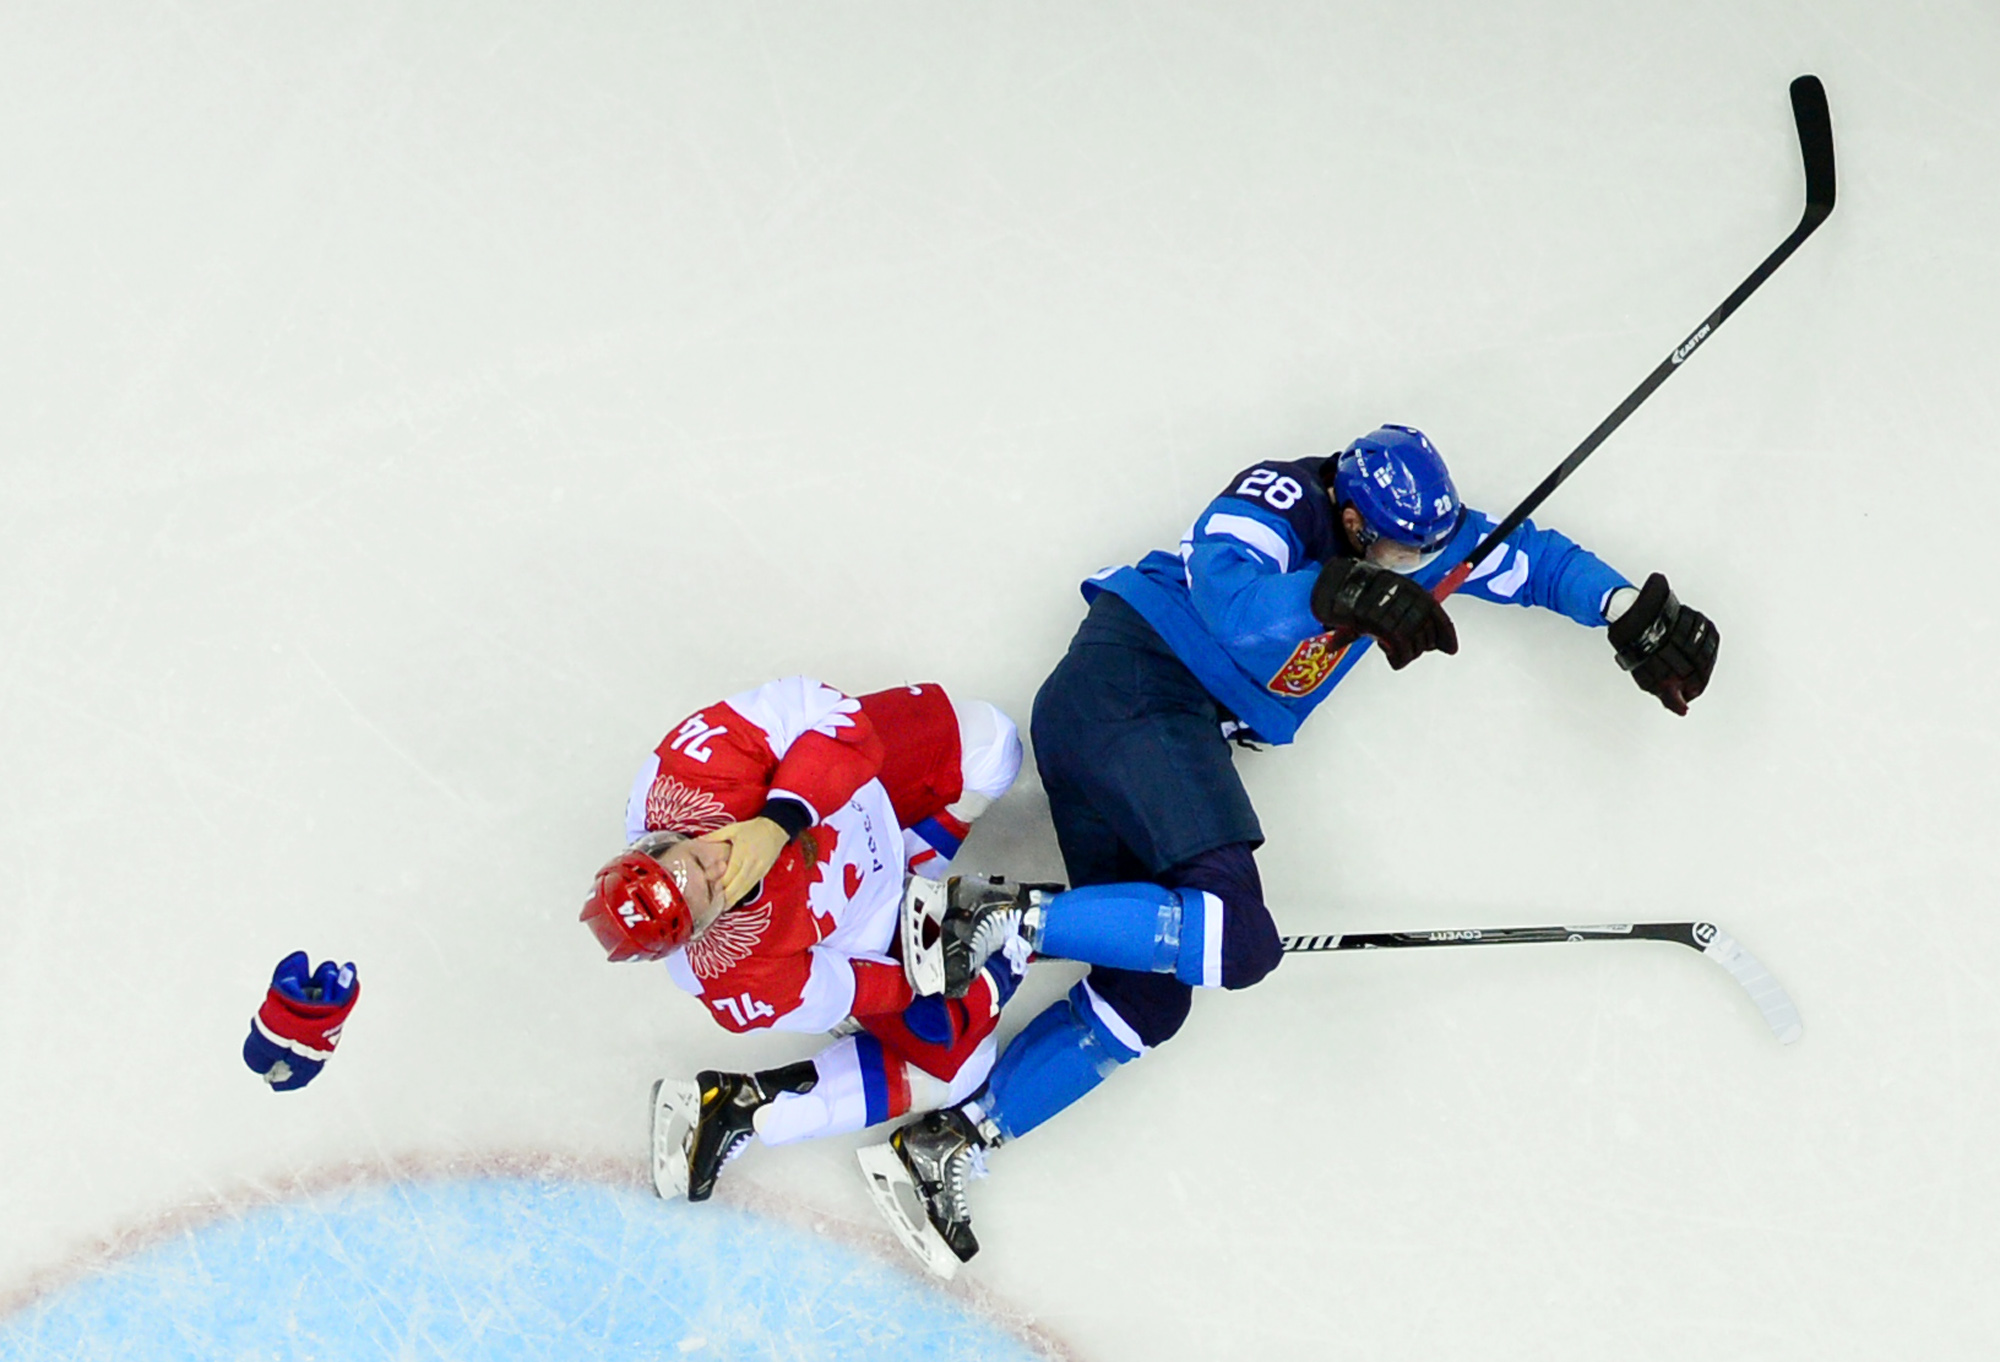 Winter Olympics 2014: Russia's ice hockey poster boy fails to get